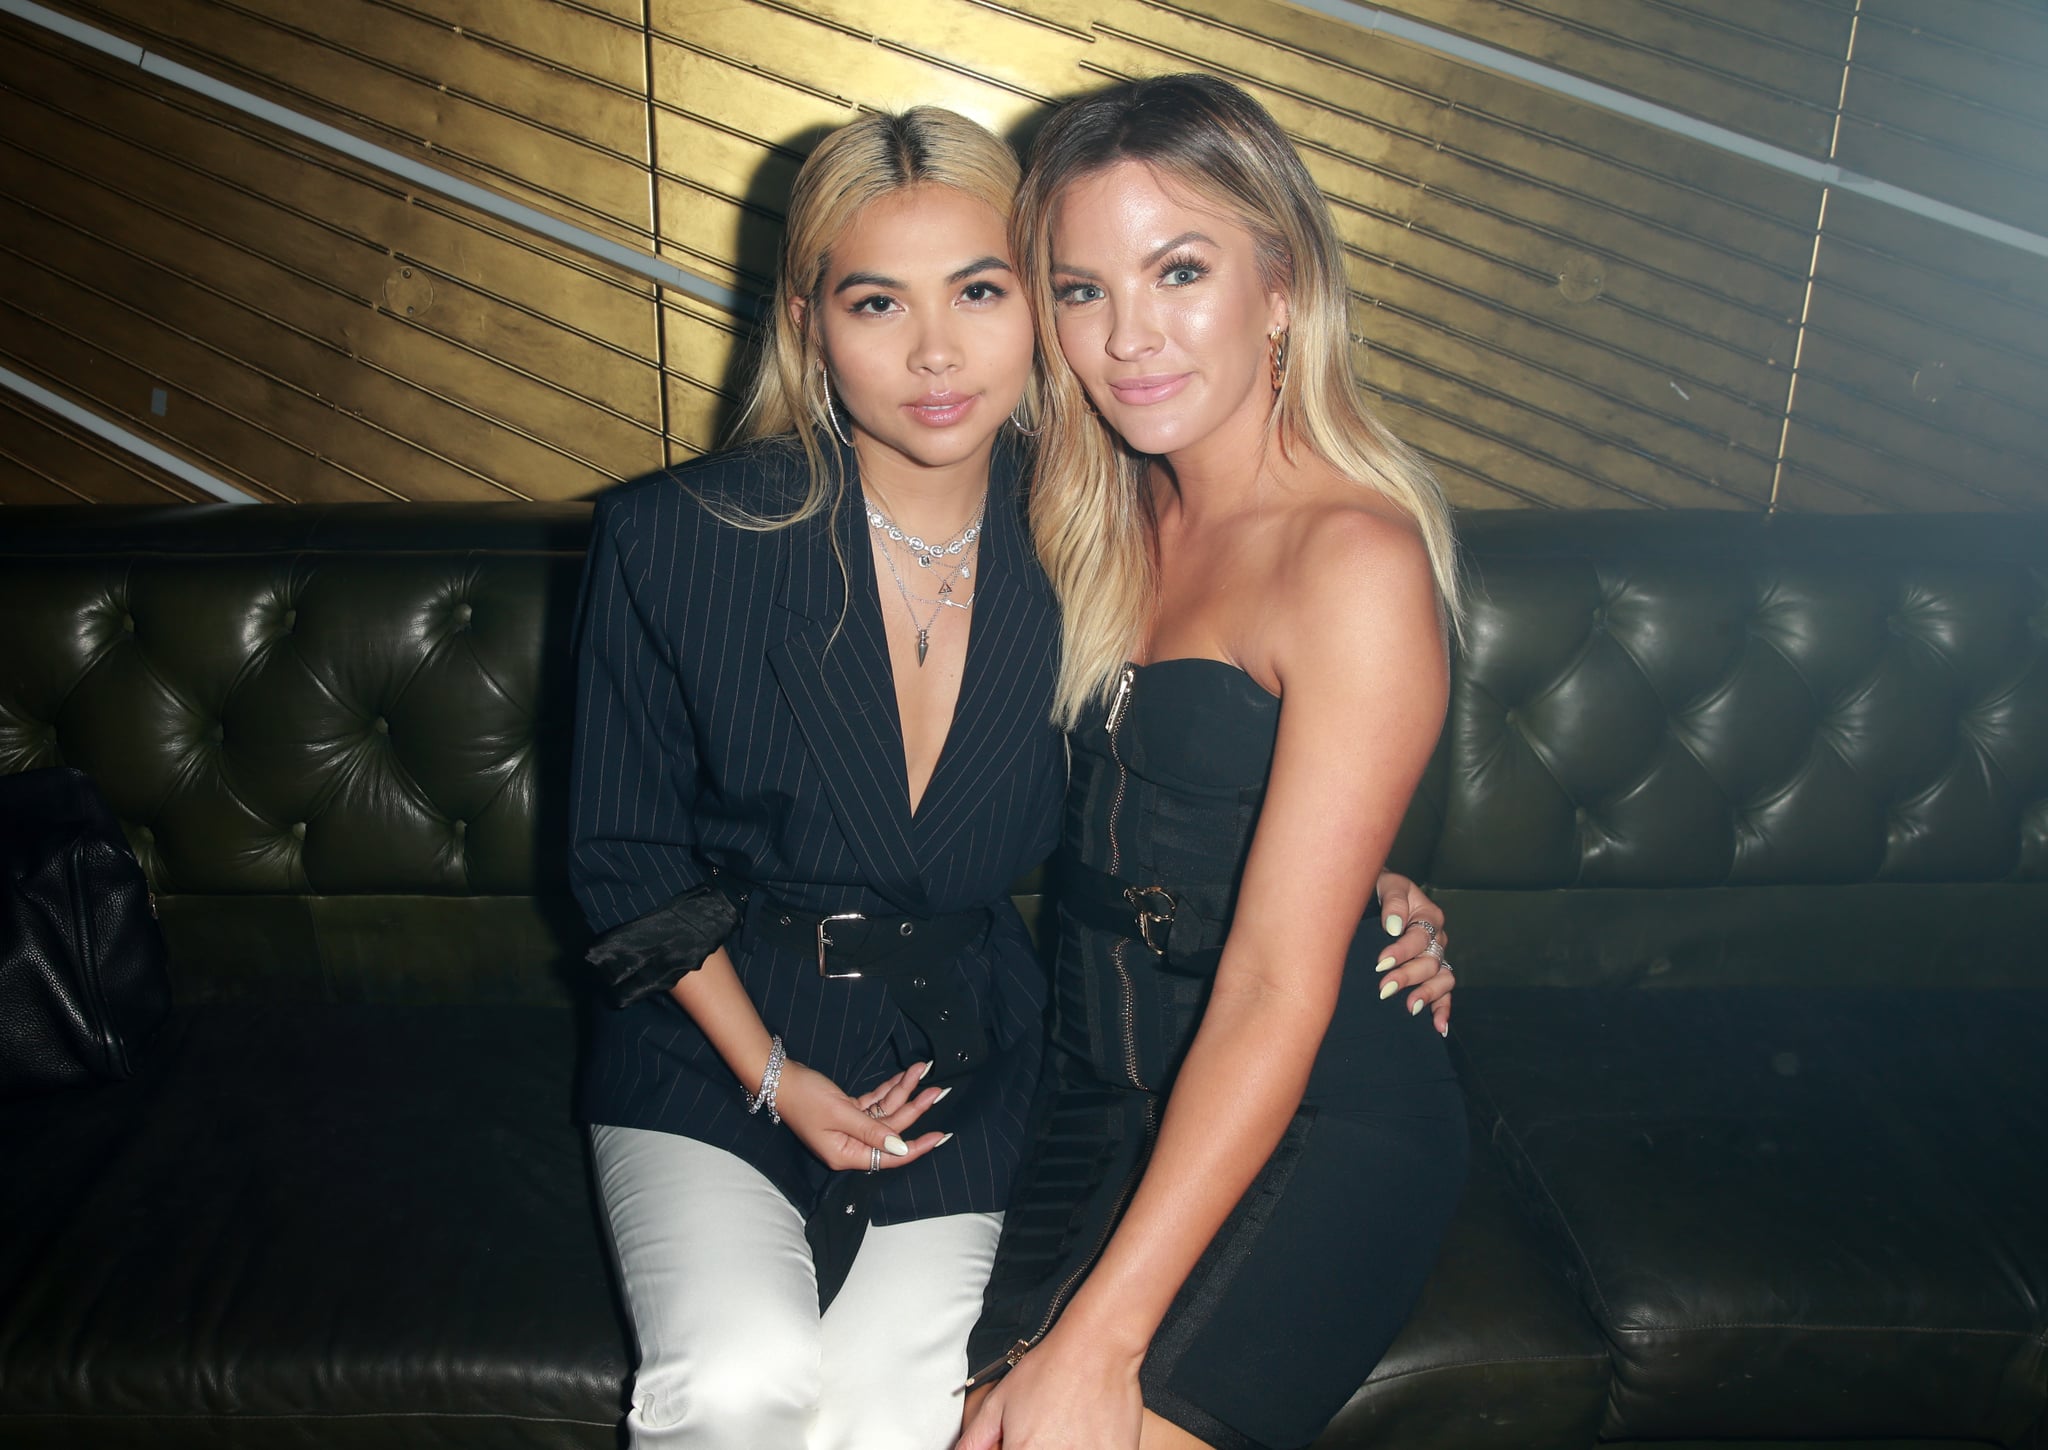 HOLLYWOOD, CA - MAY 22: Hayley Kiyoko and Becca Tilley attend NYLON's Annual Young Hollywood Party sponsored by Pinkie Swear at Avenue Los Angeles on May 22, 2018 in Hollywood, California.. (Photo by Rich Fury/Getty Images for NYLON)